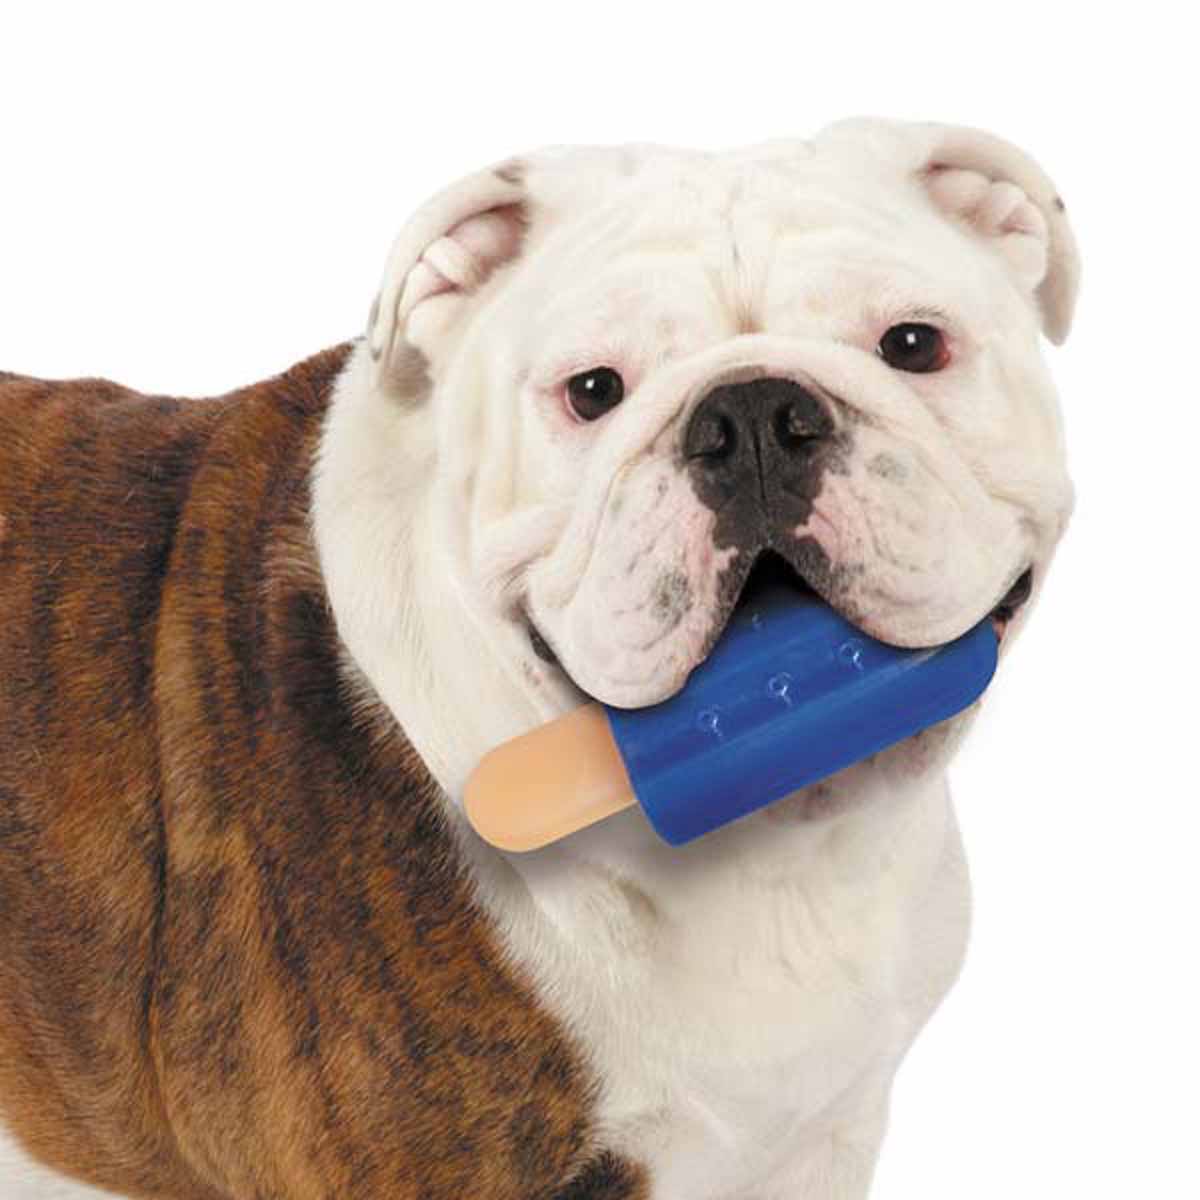 https://images.baxterboo.com/global/images/products/large/cool-pup-cooling-dog-toy-popsicle-3100.jpg